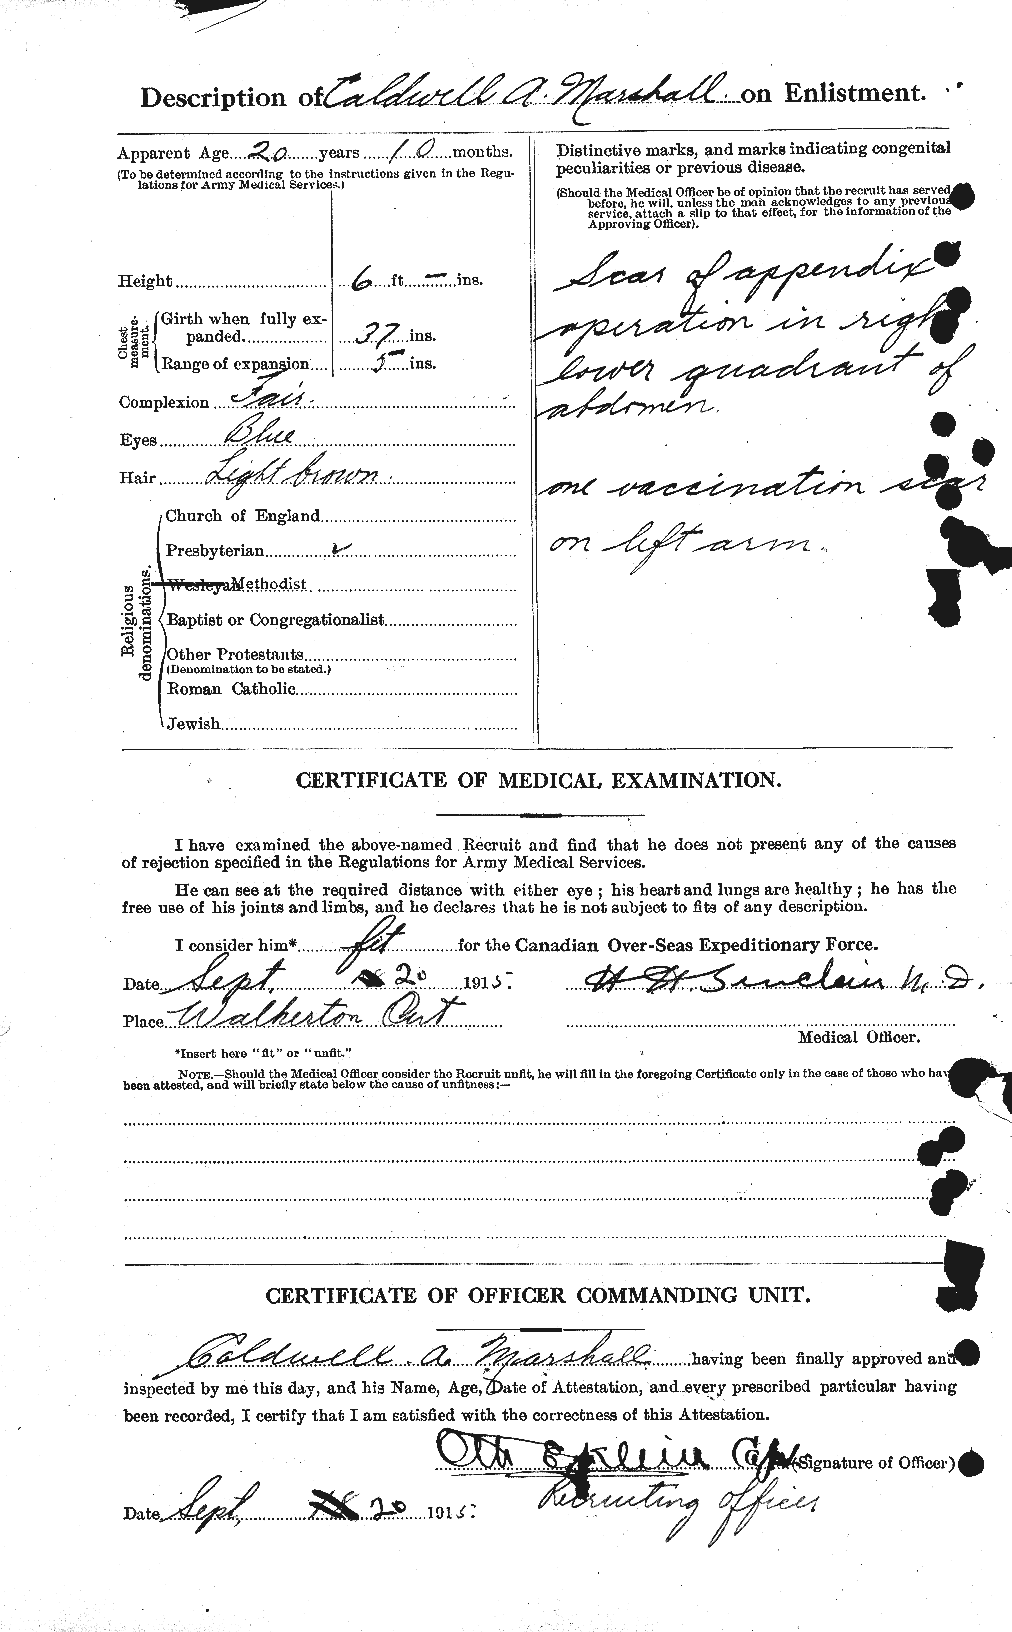 Personnel Records of the First World War - CEF 482005b